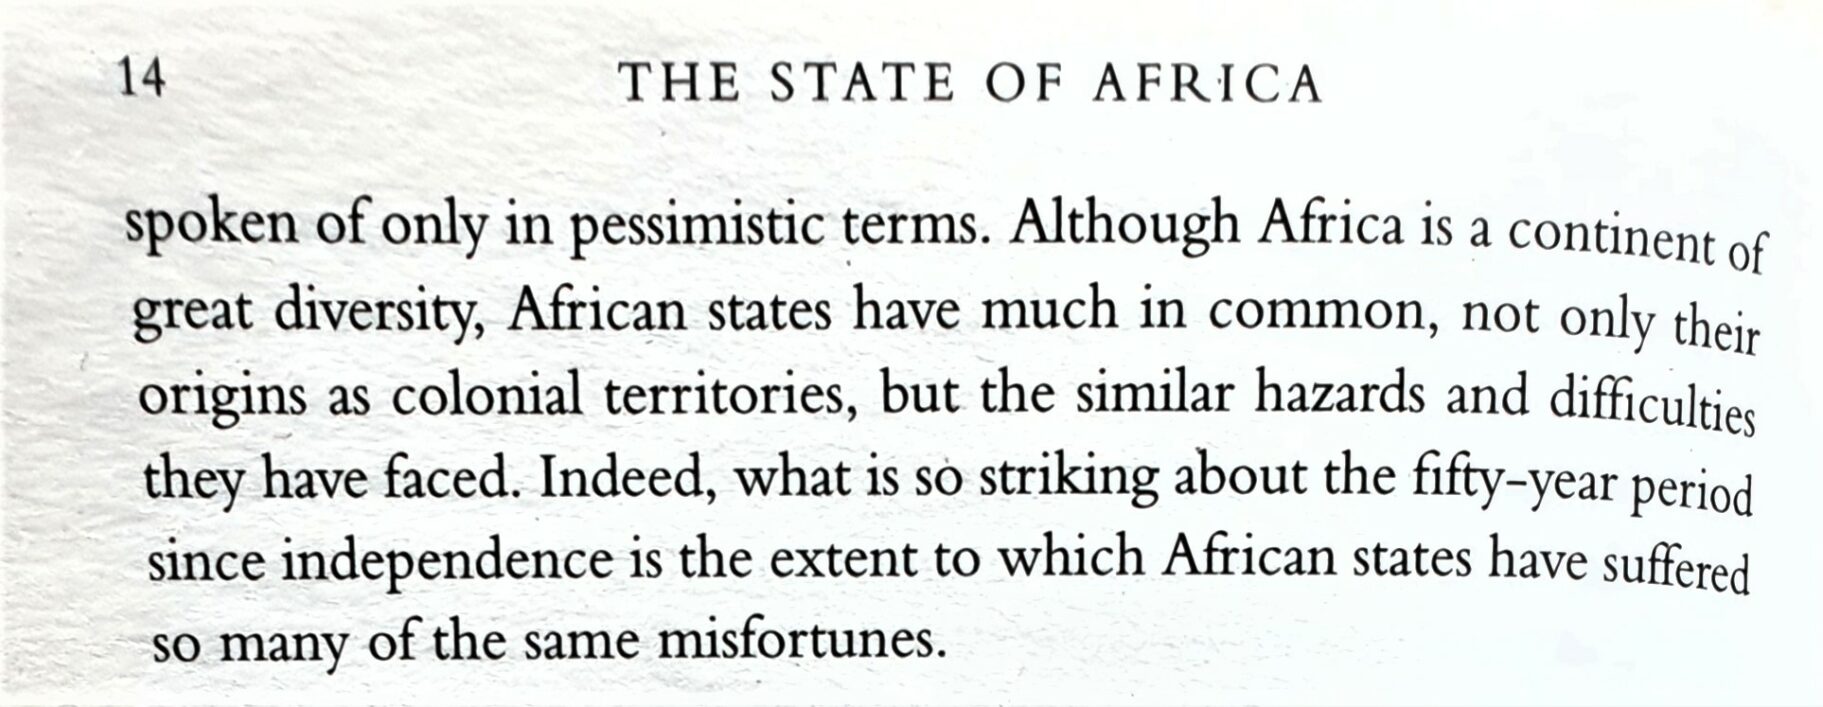 State of Africa1